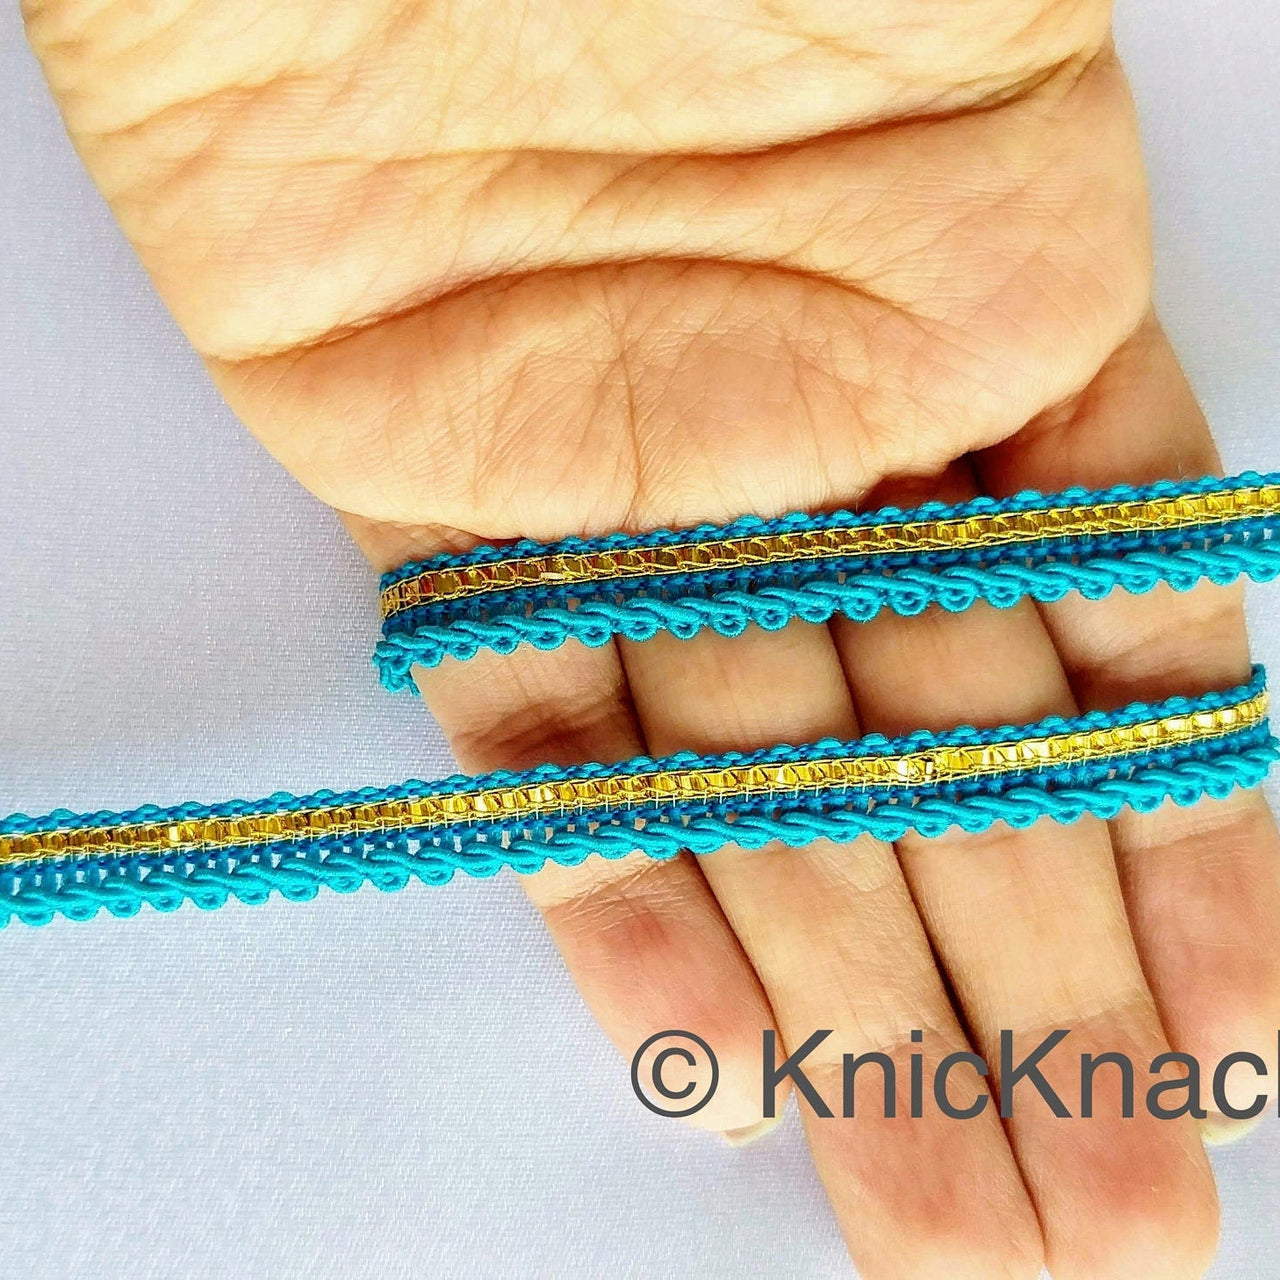 Blue And Gold Gimp Trim, Approx. 8mm wide, Upholstery Trim